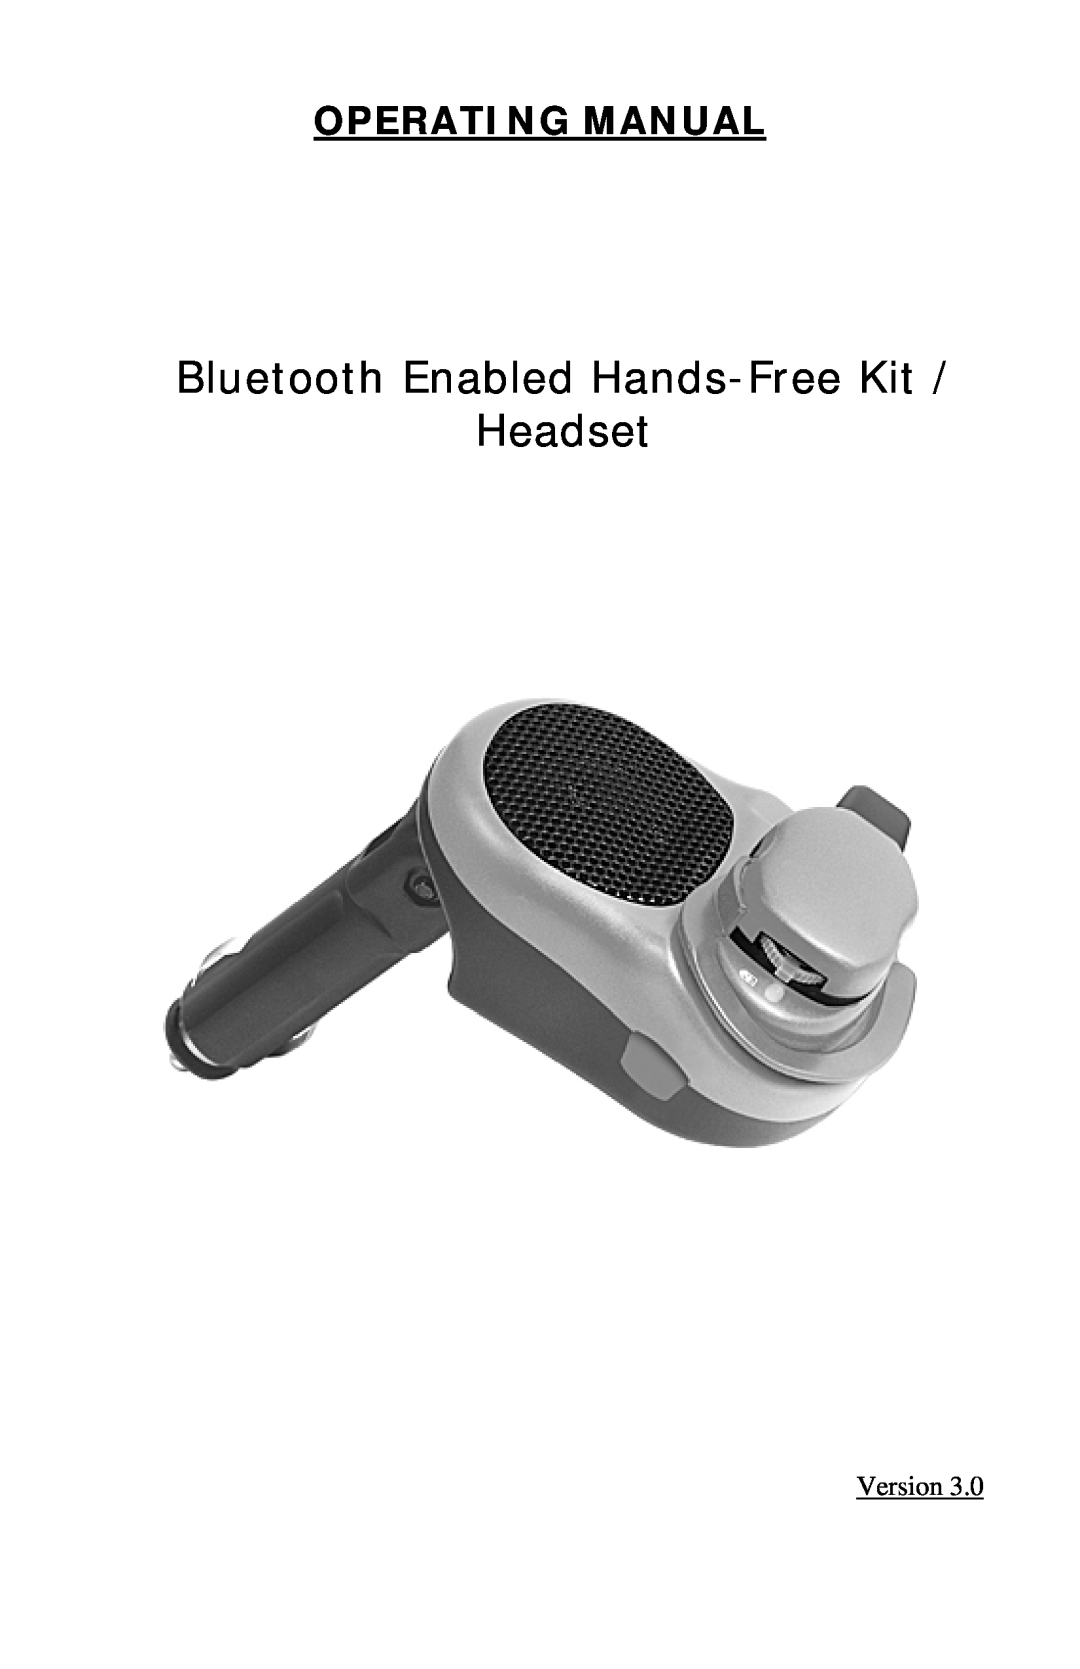 Sony Ericsson Bluetooth Enabled Hands-Free Kit /Headset manual Operati N G M An Ual, Version 